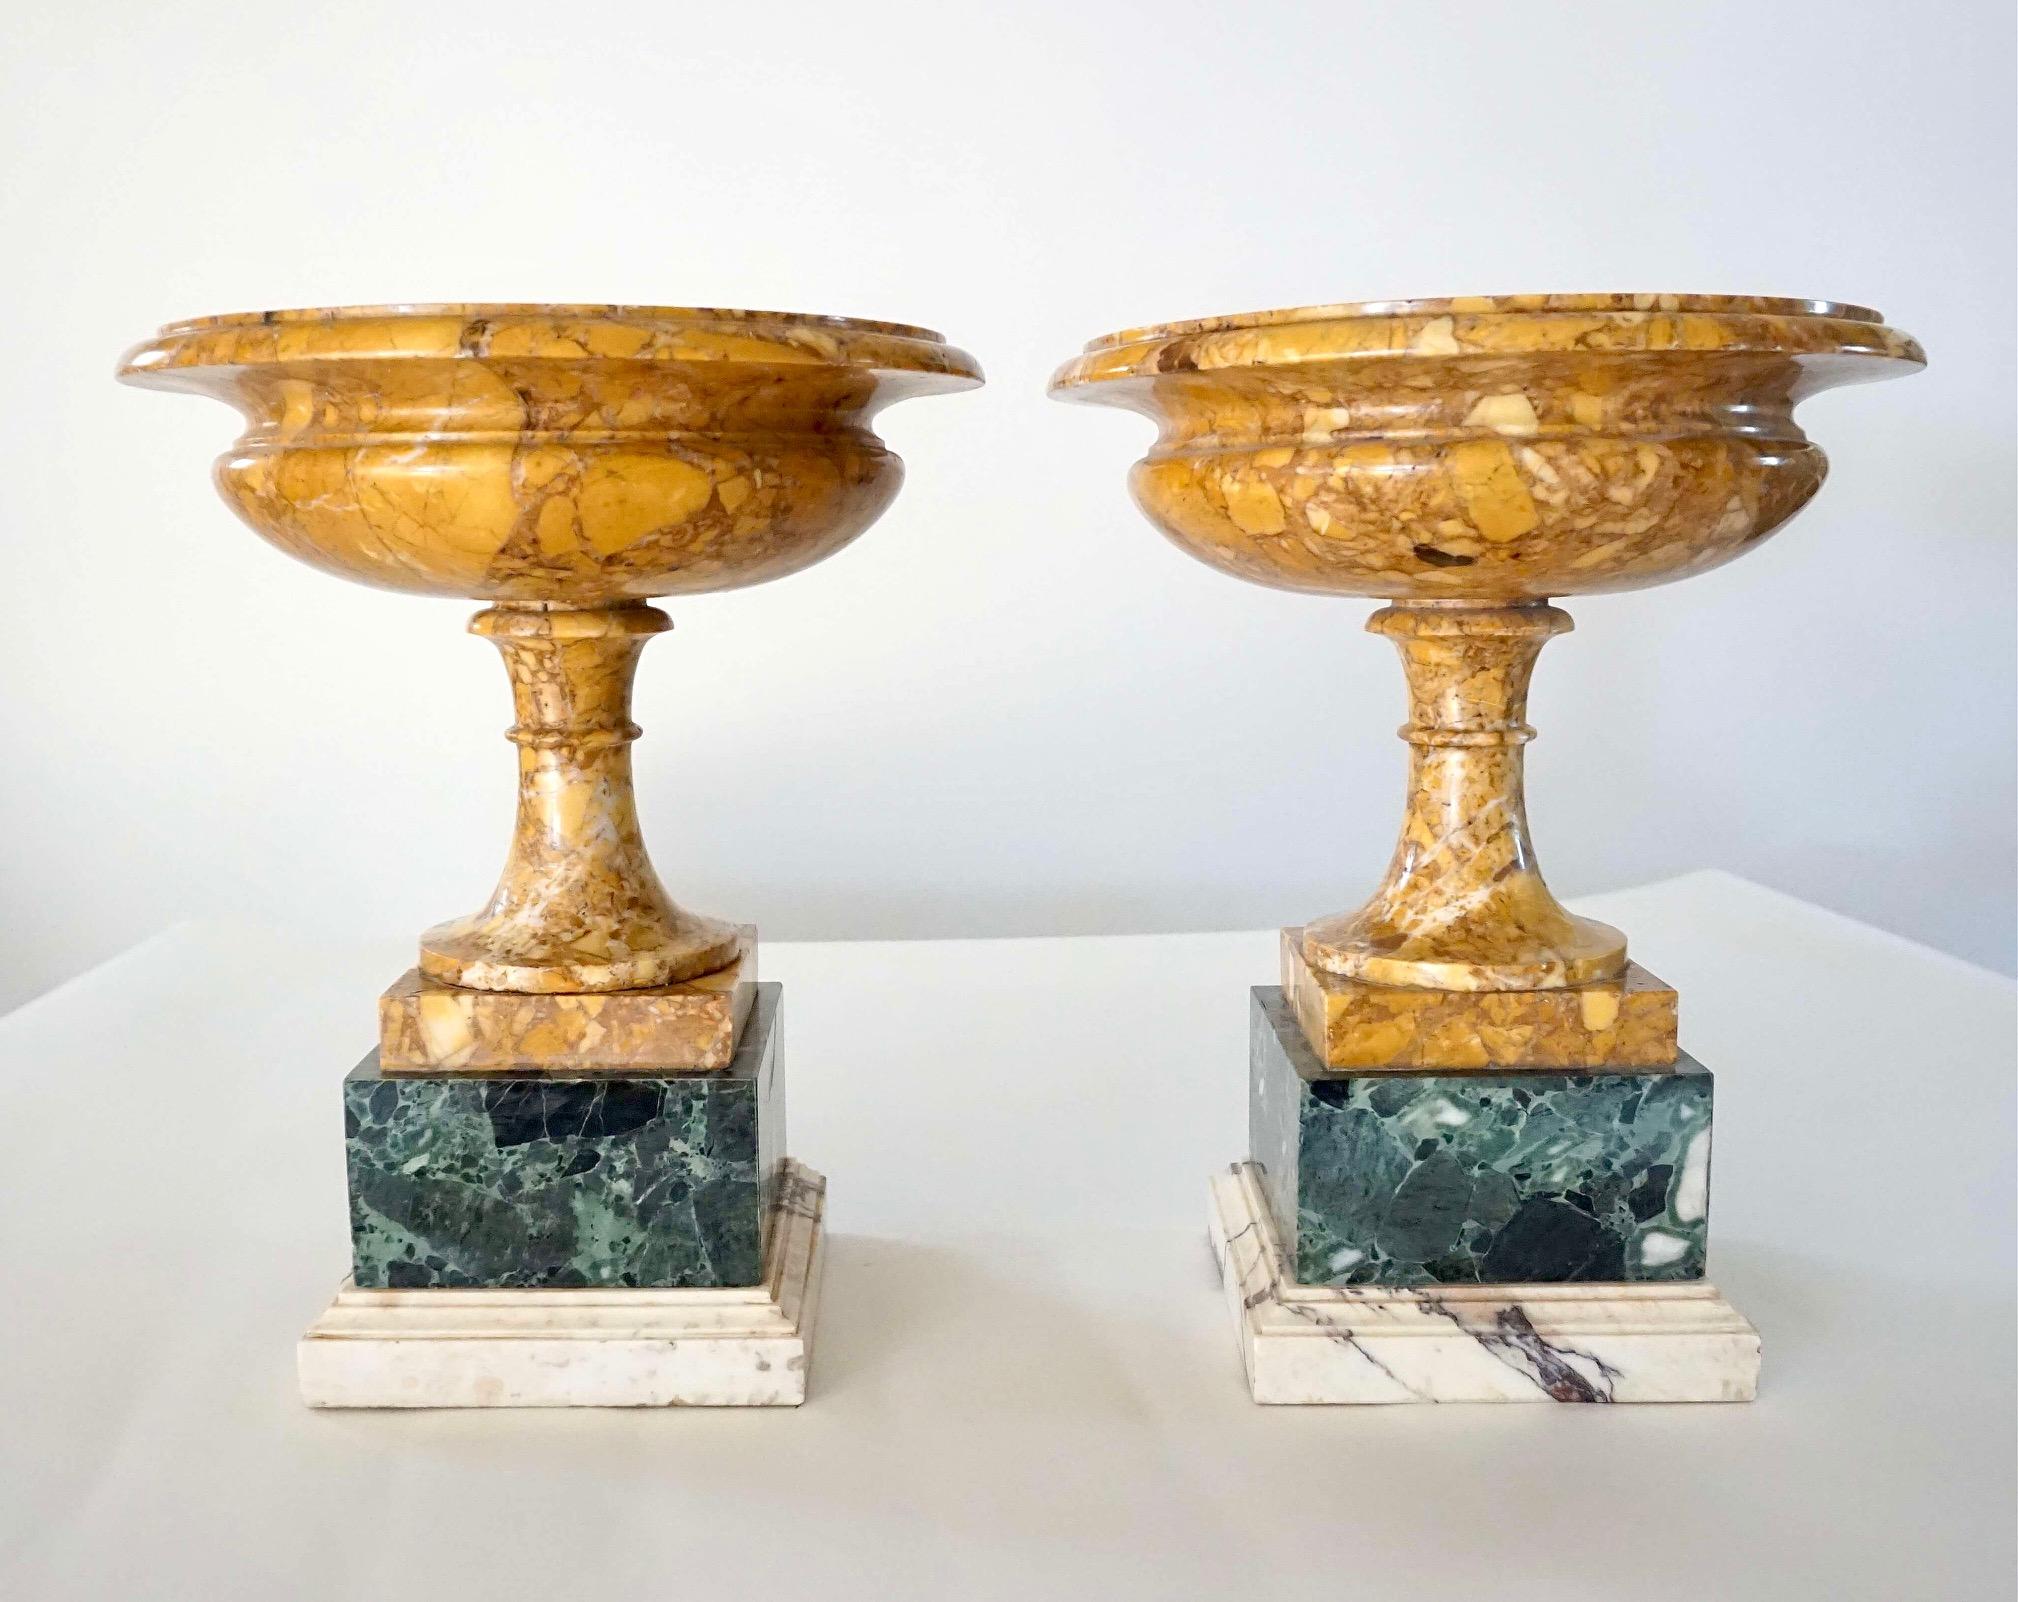 Pair of 19th Century Italian Neoclassical Tazze in Polychrome Marbles For Sale 3